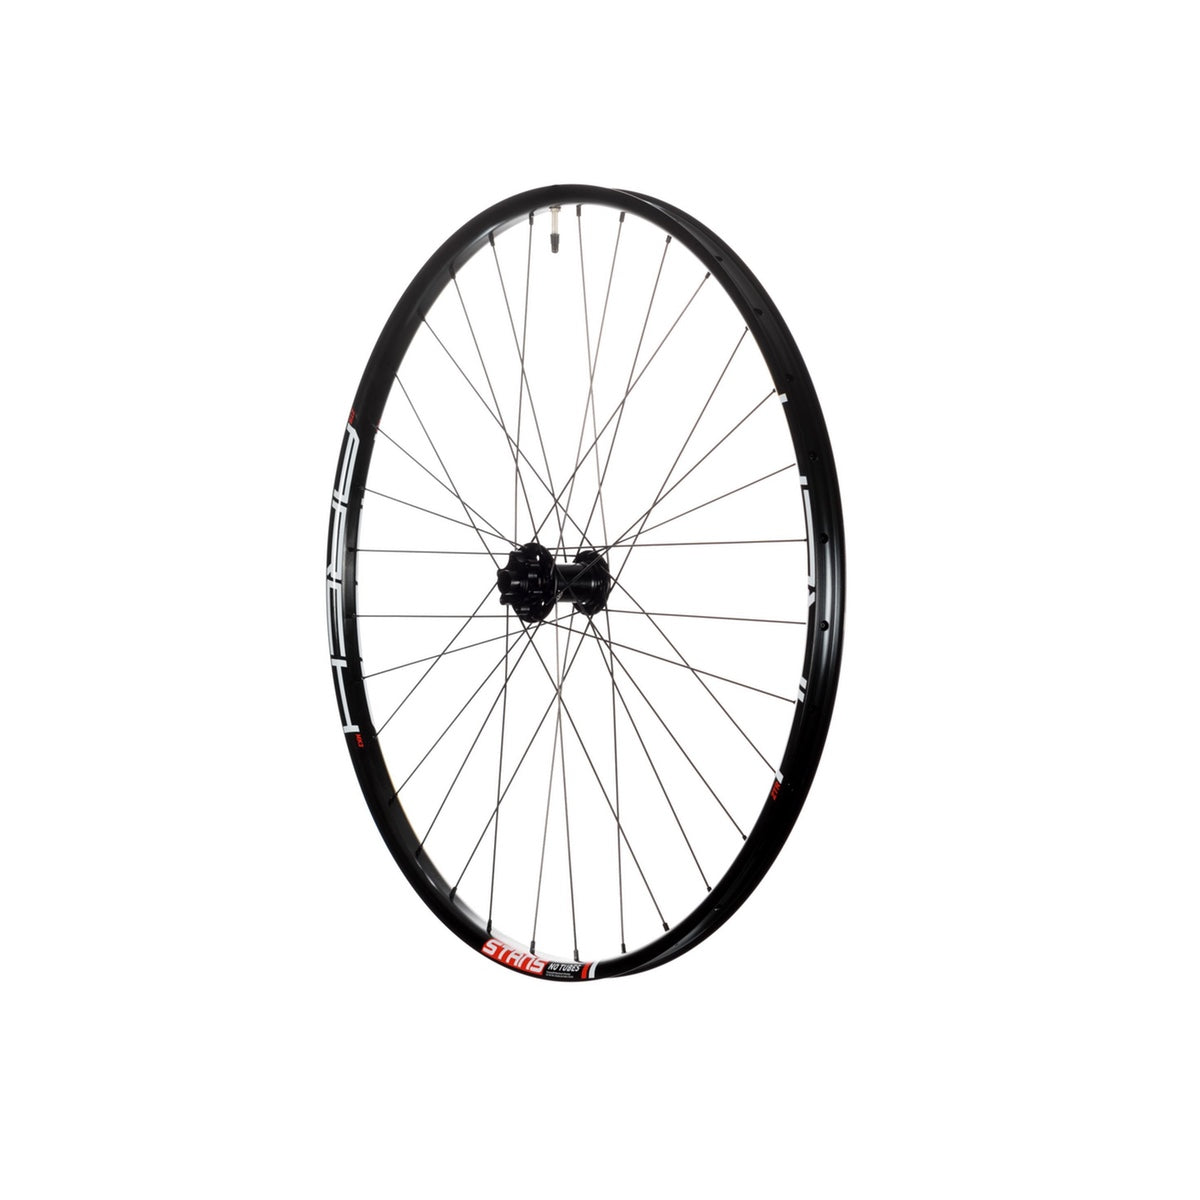 Stans Notubes Arch MK3 27.5 15x110mm Front MTB Wheel